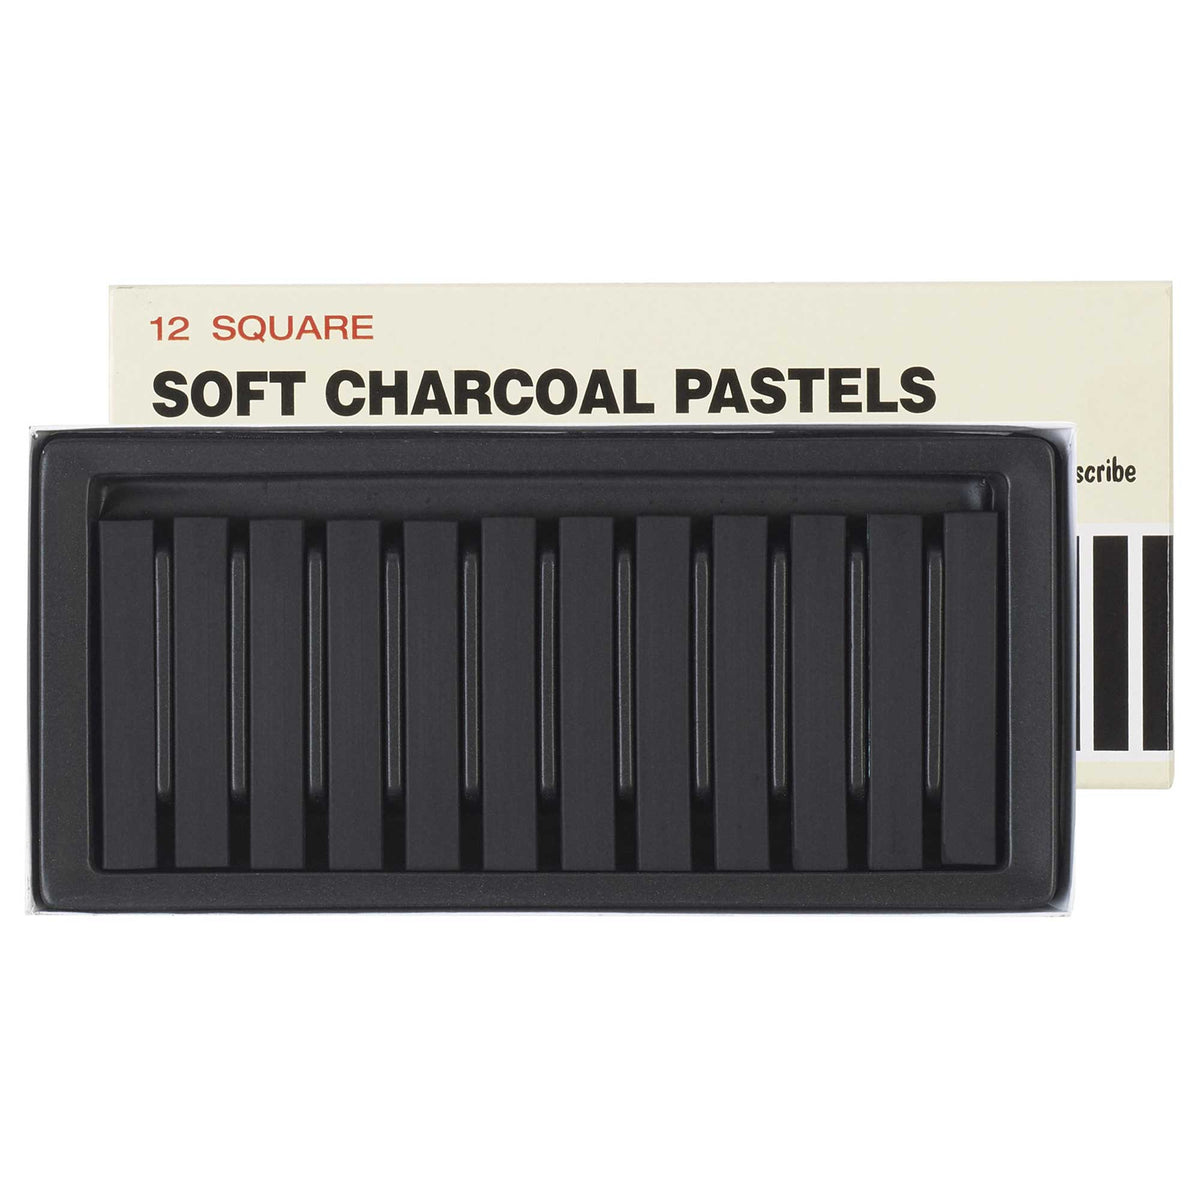 Inscribe Soft Charcoal Pastels - Set of 12 Square Pastels